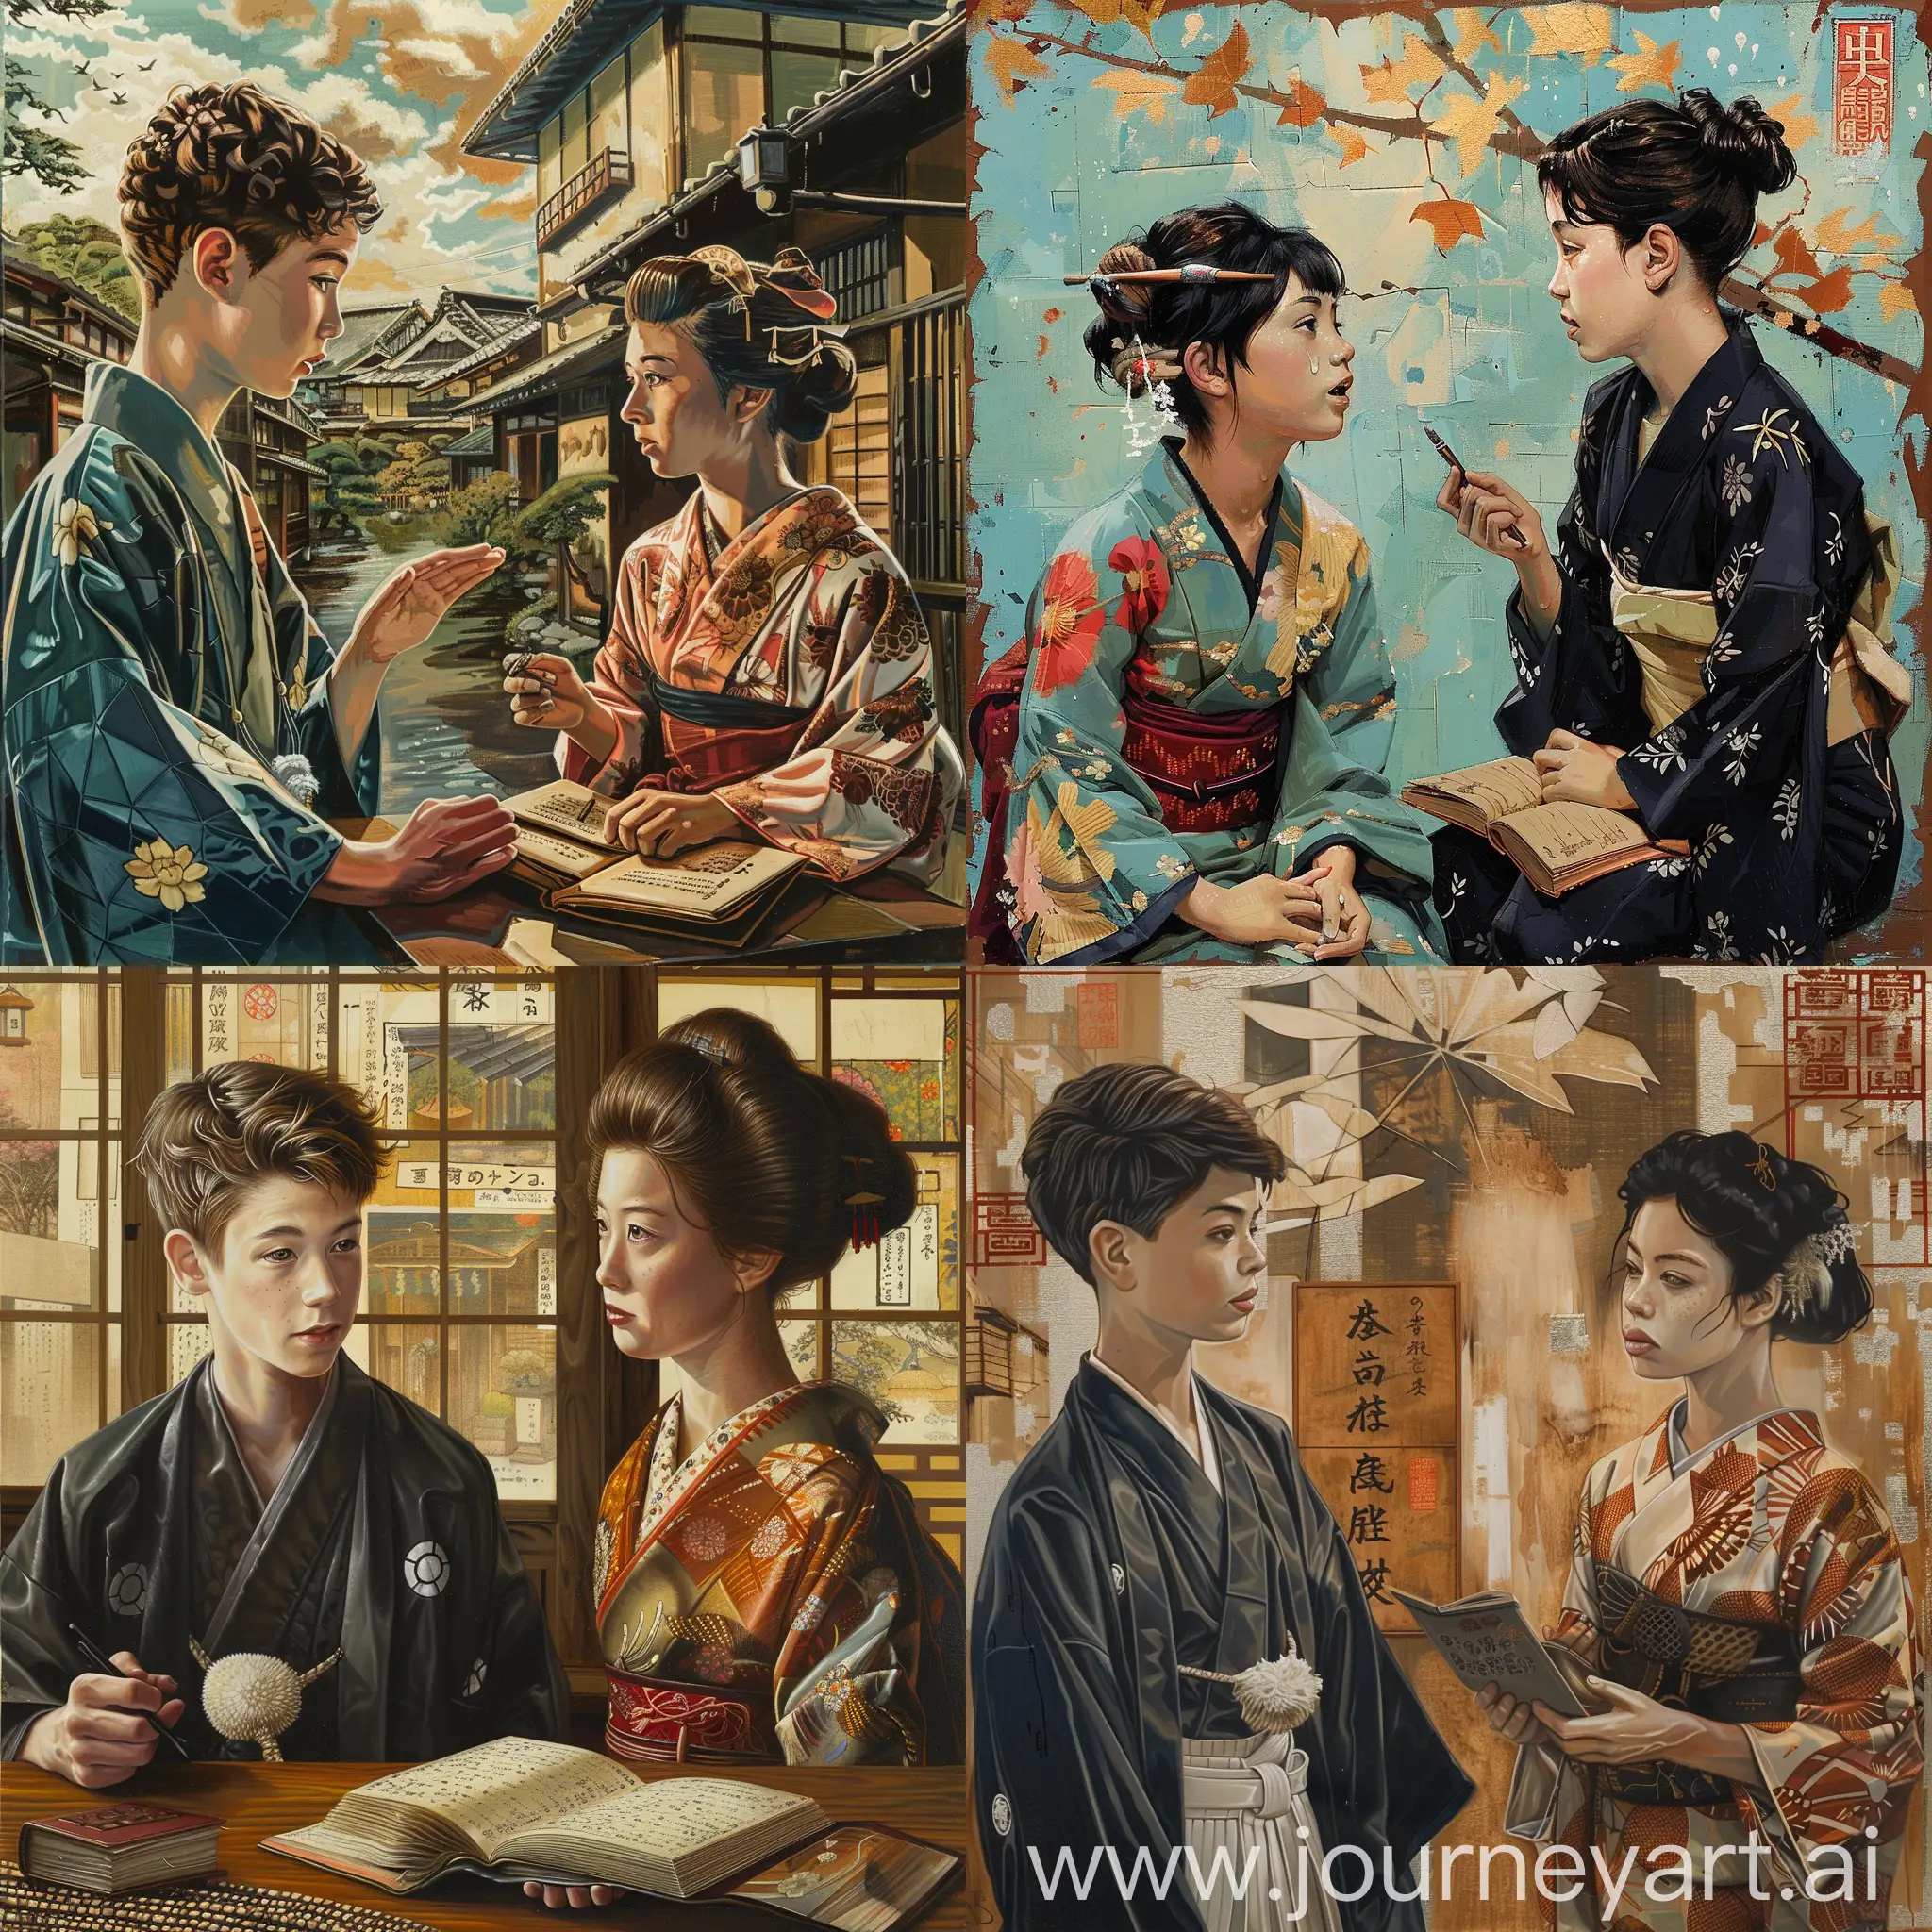 Japanese 18 year old boy and servant woman in kimono having difficulty communicating, reflecting collective perseverance, learning environment, dreamy mood, relief, east village art, storybook bookcover.